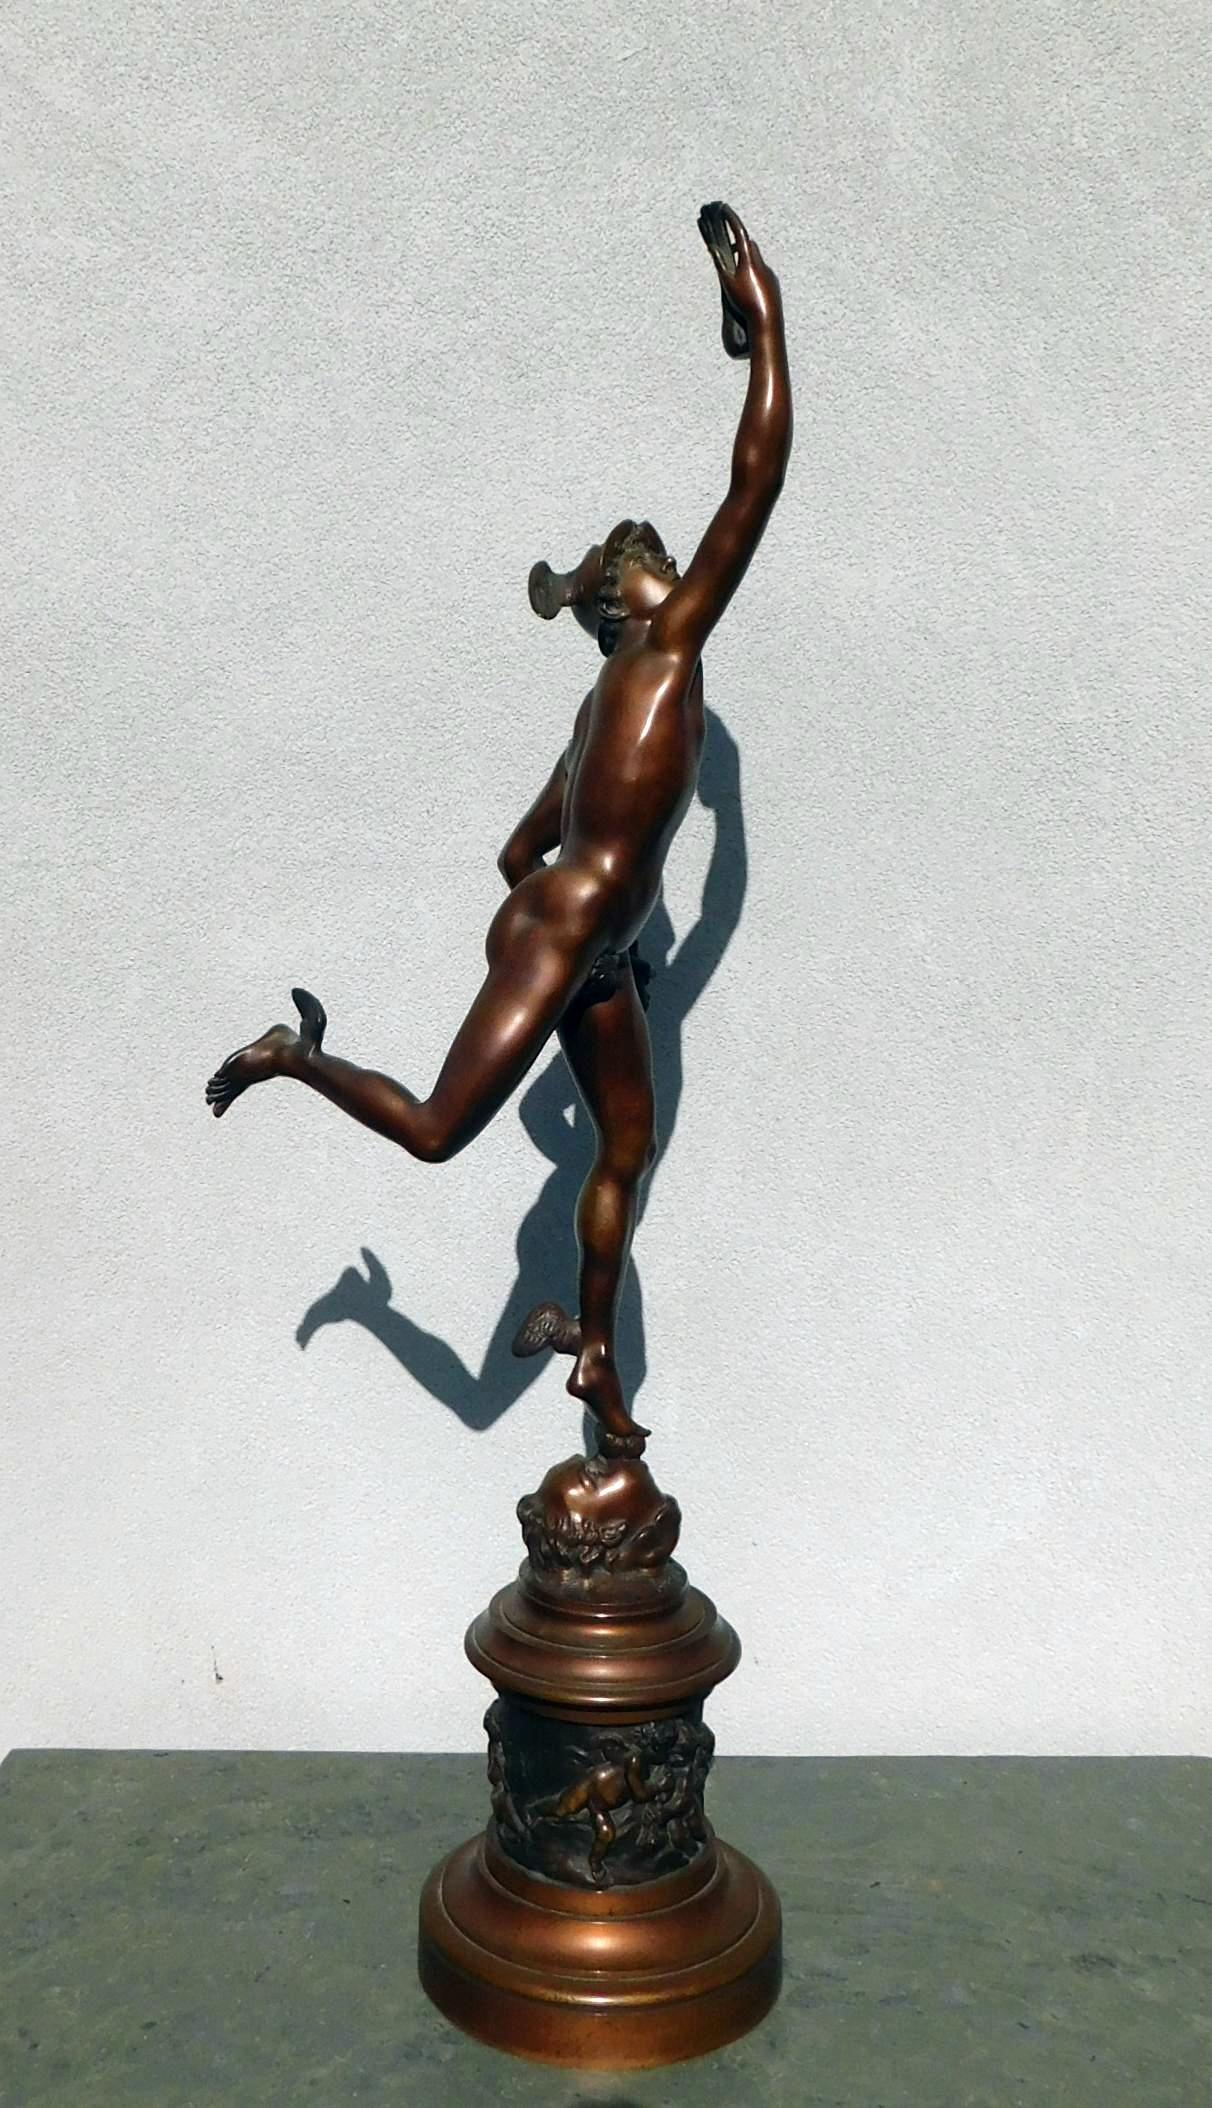 Pierre Emmanuel Guerin, (American, NY, NY born France, 1833-1911). 
Large PE Guerin foundry bronze casting of Mercury. Measures 36